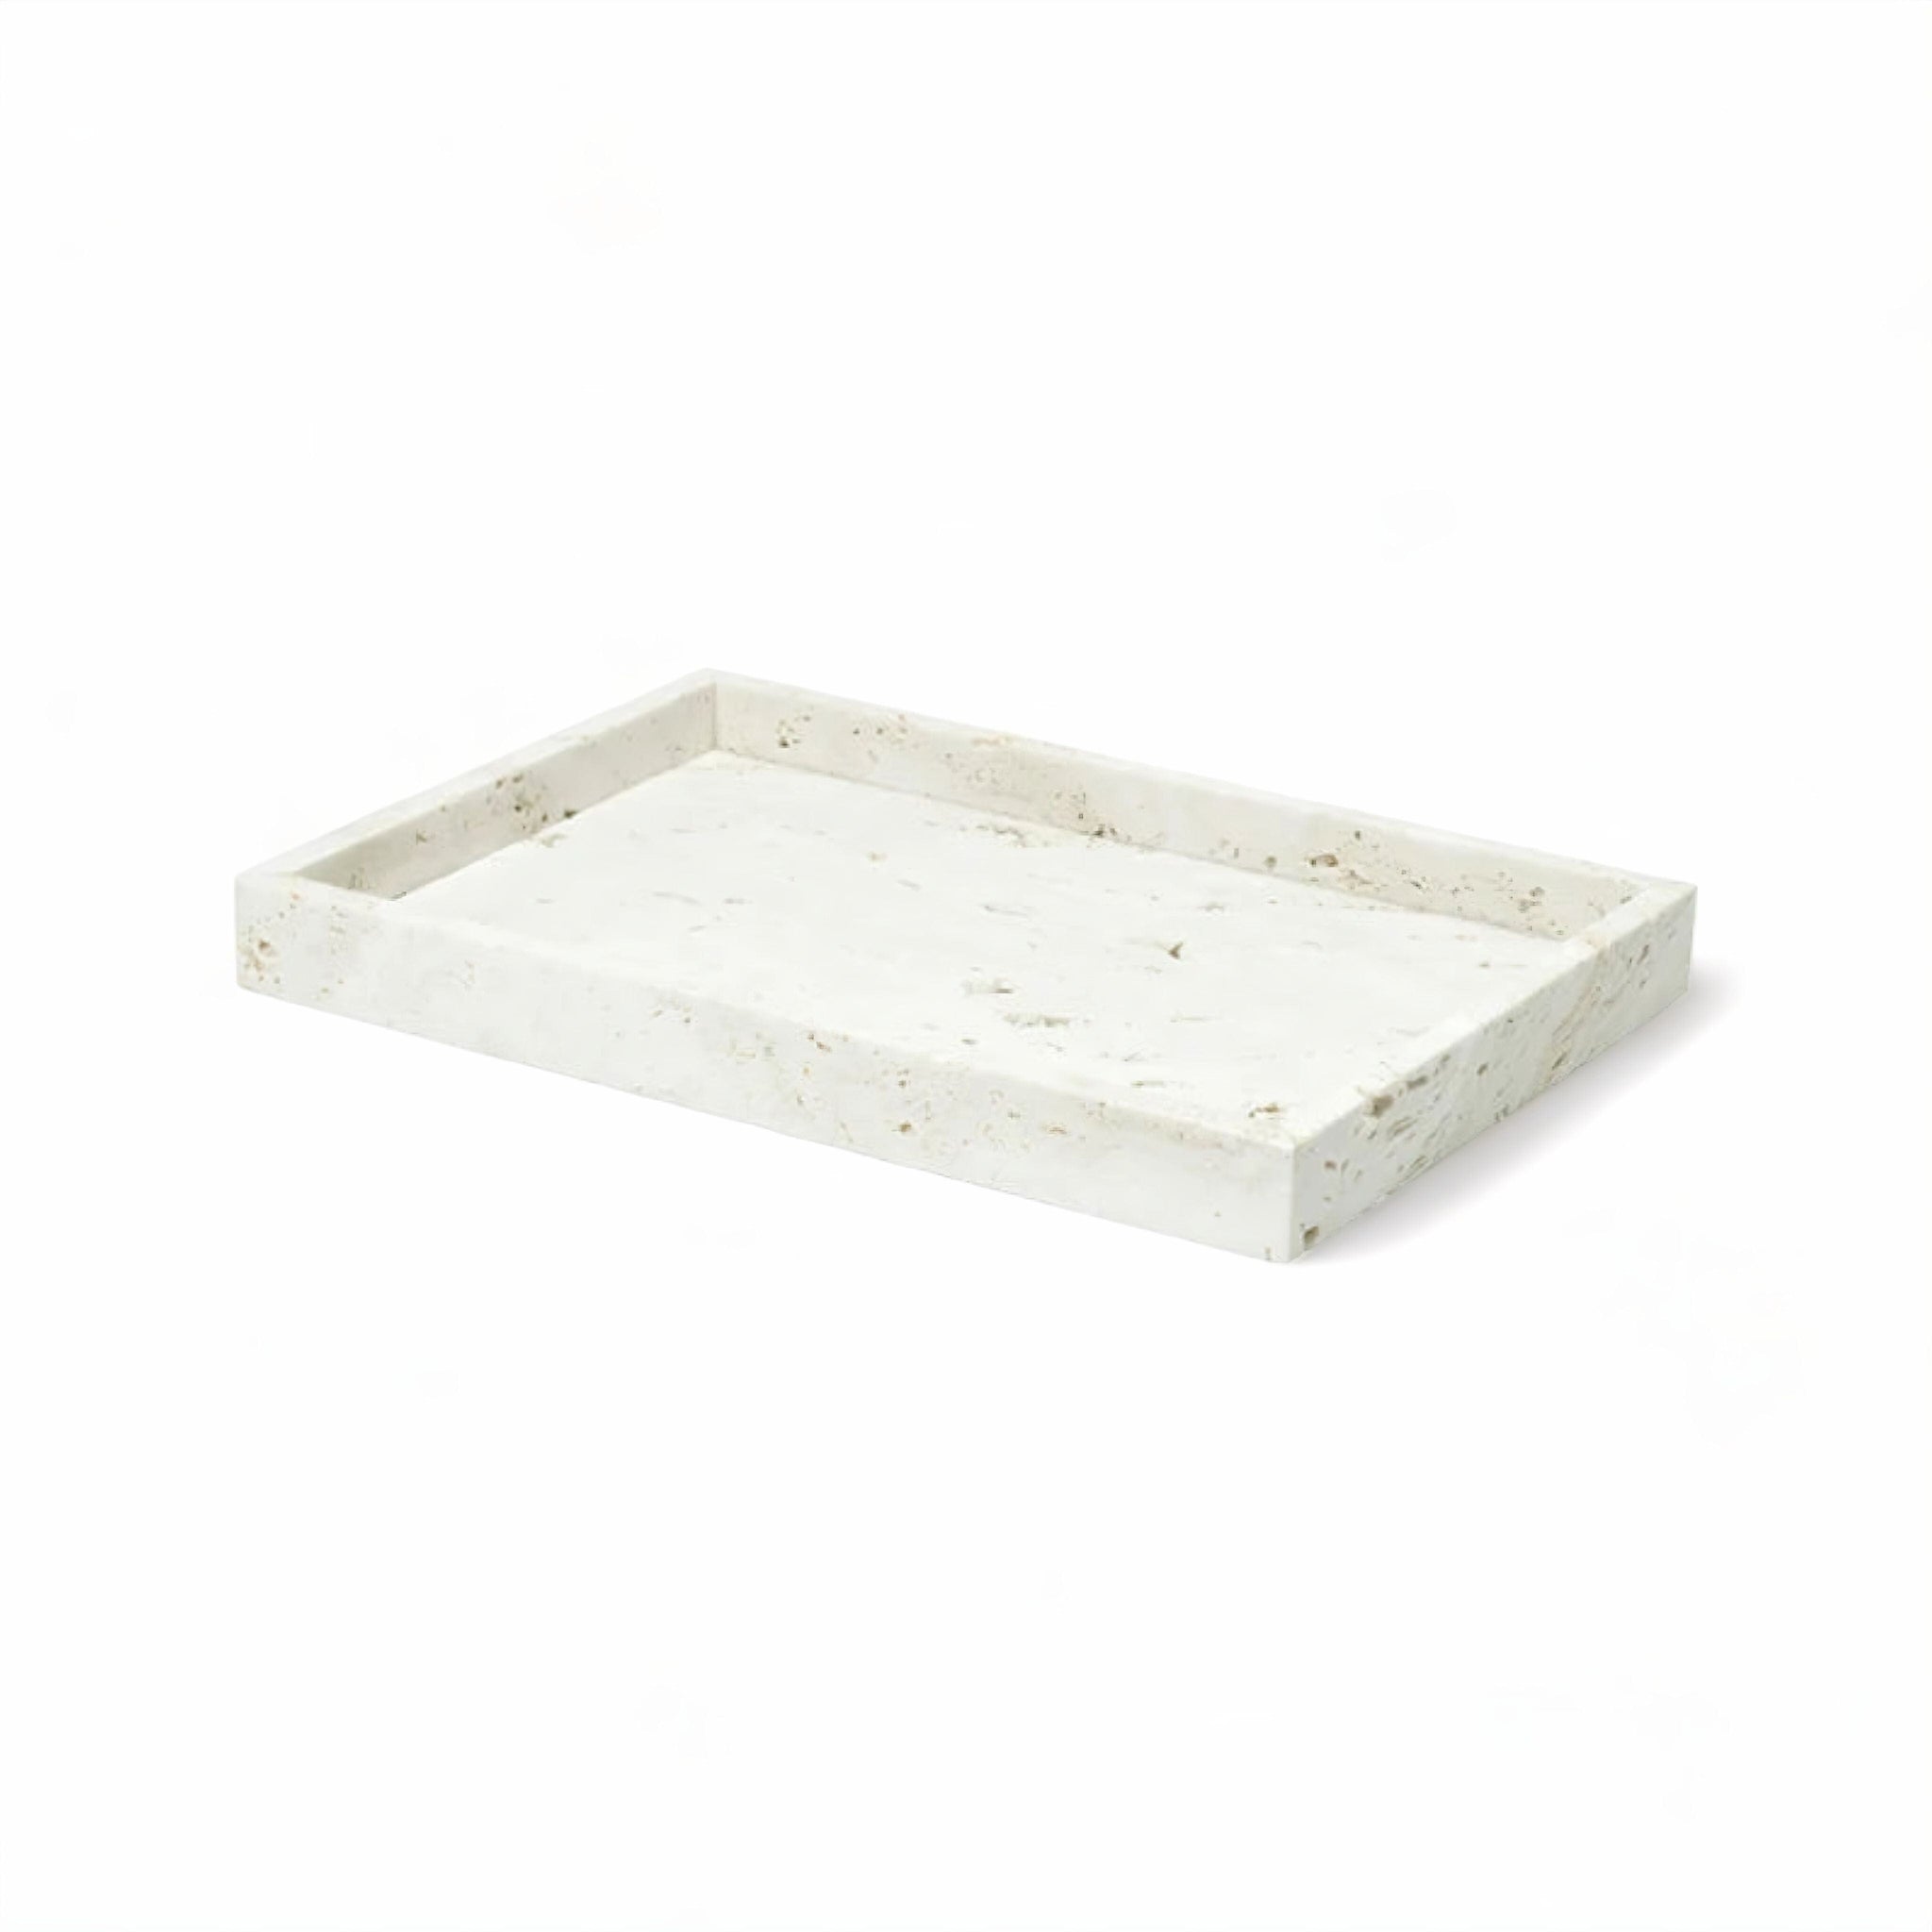 Travertine Tranquility Collection Tray B 